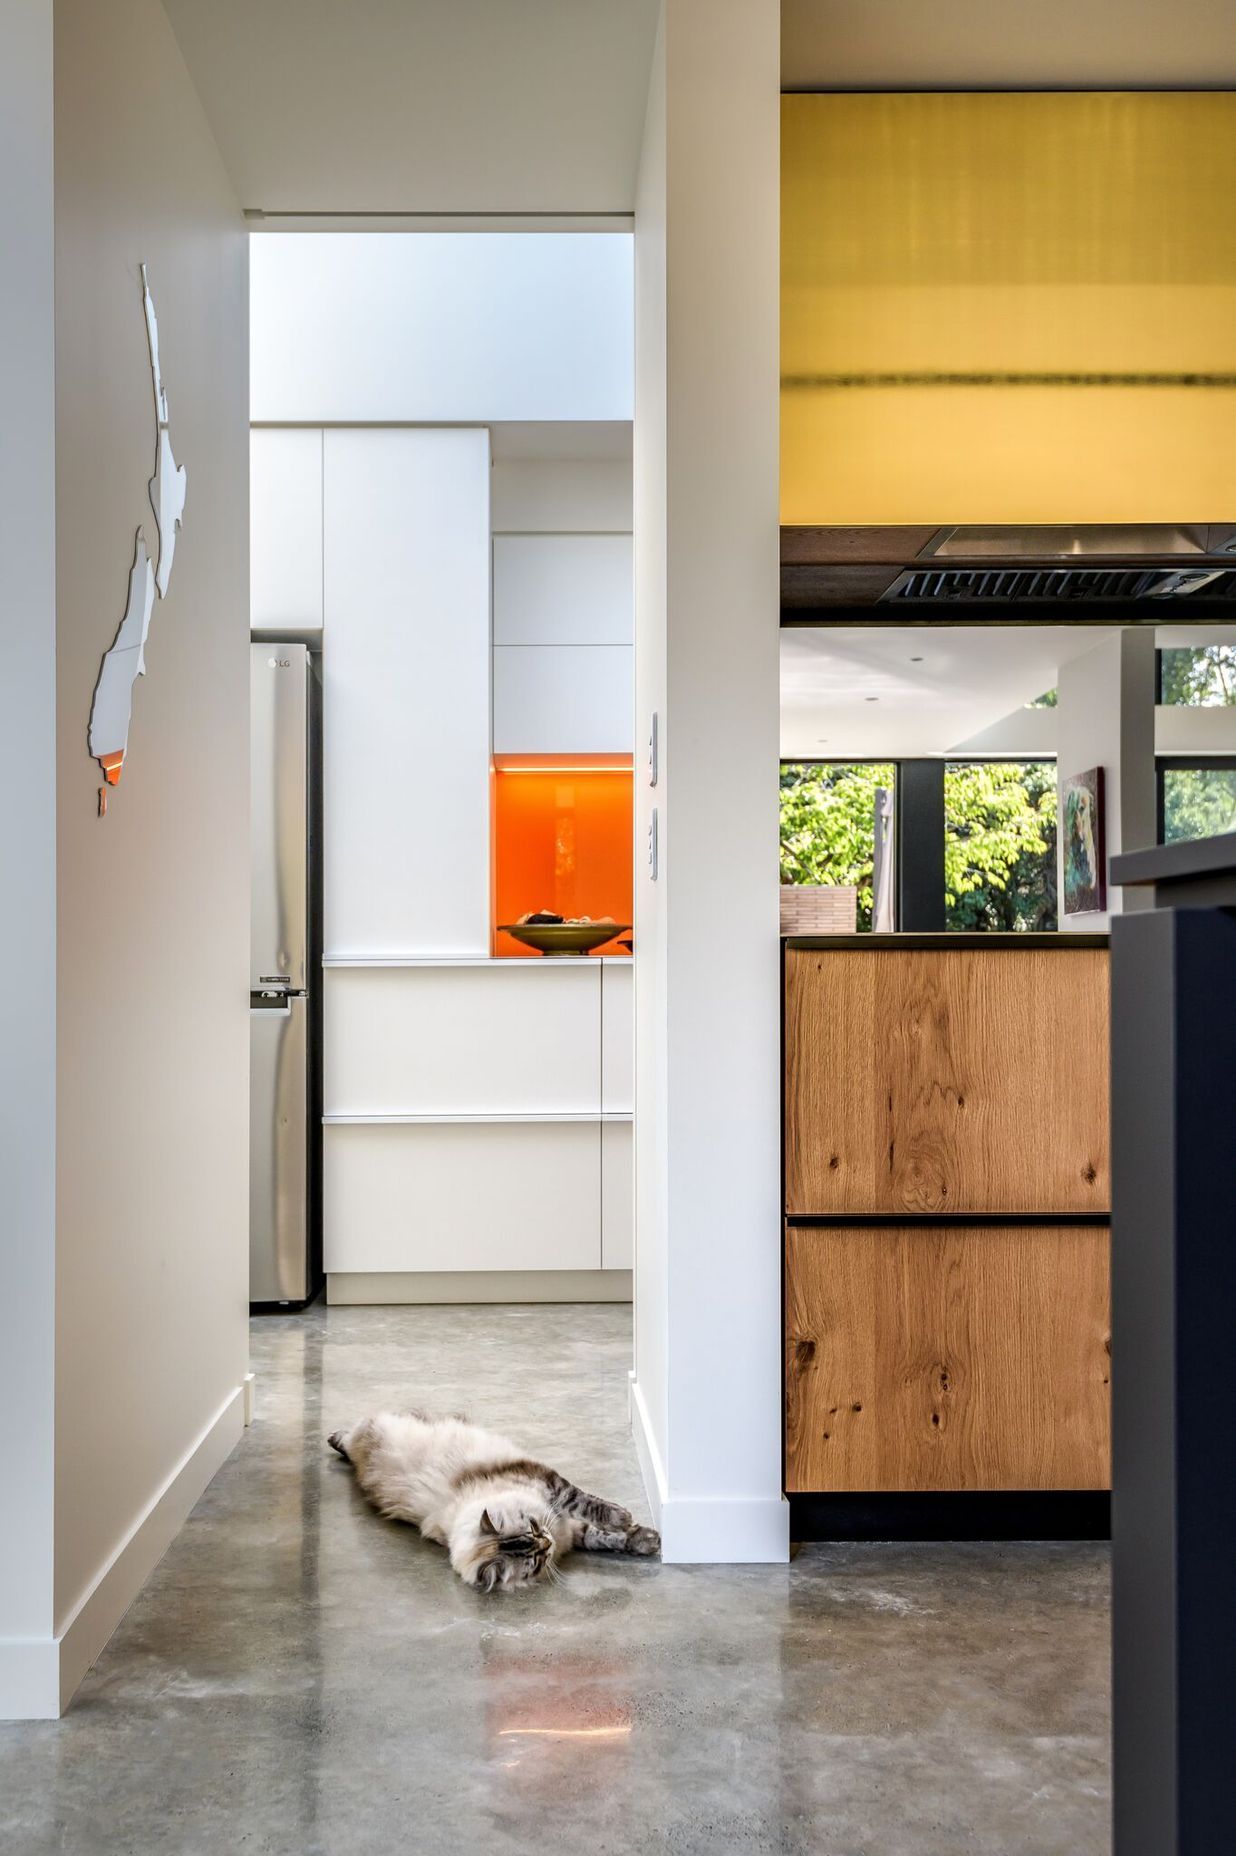 Looking through the kitchen to the scullery. Timber, gold and orange add warmth to the grey and white material palette.